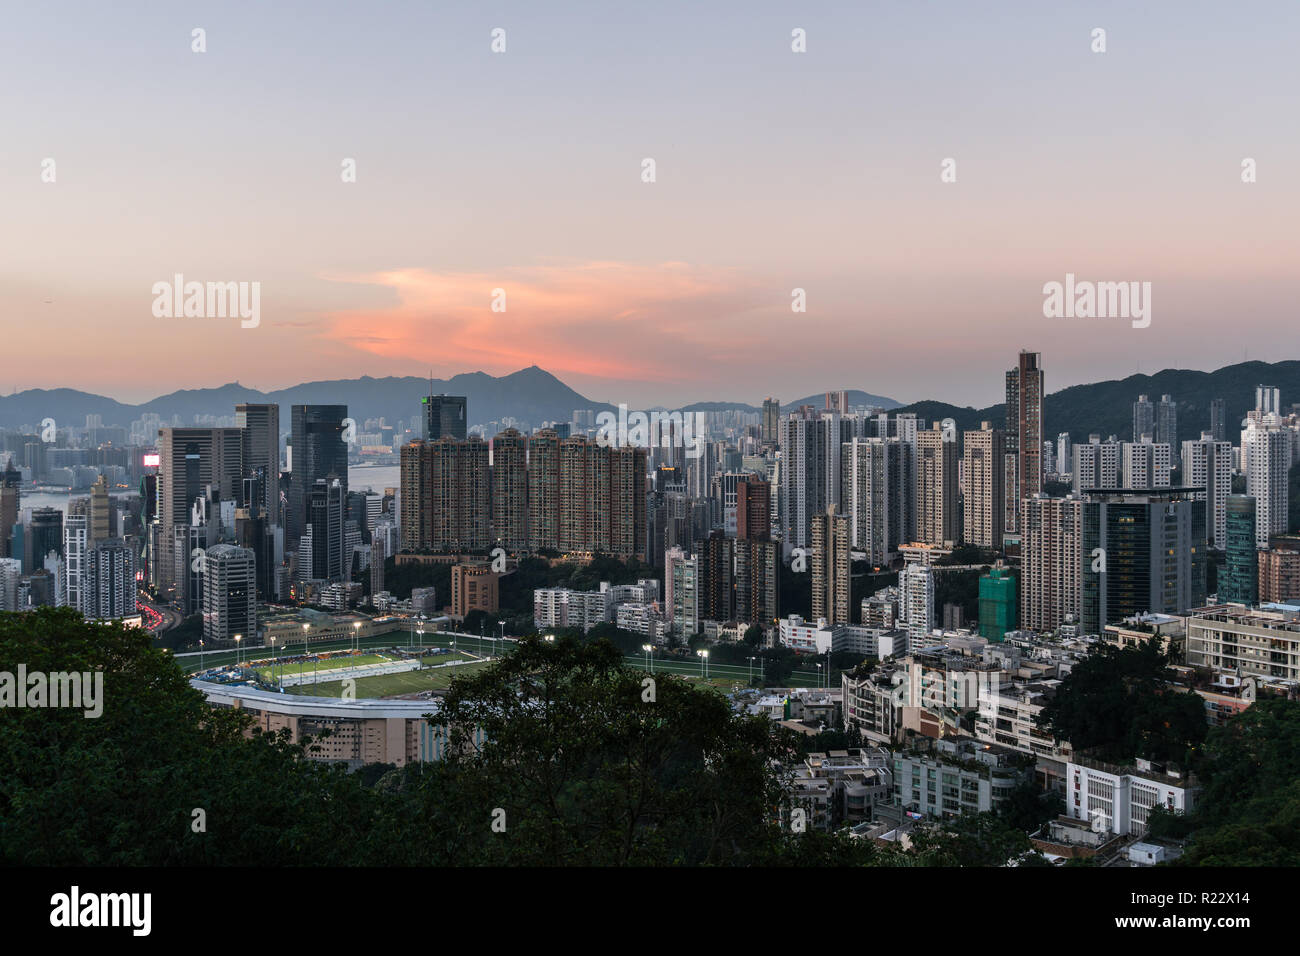 Sunset over Happy Valley district, famous for its horse racecourse  in Hong Kong island, Hong Kong SAR in China Stock Photo